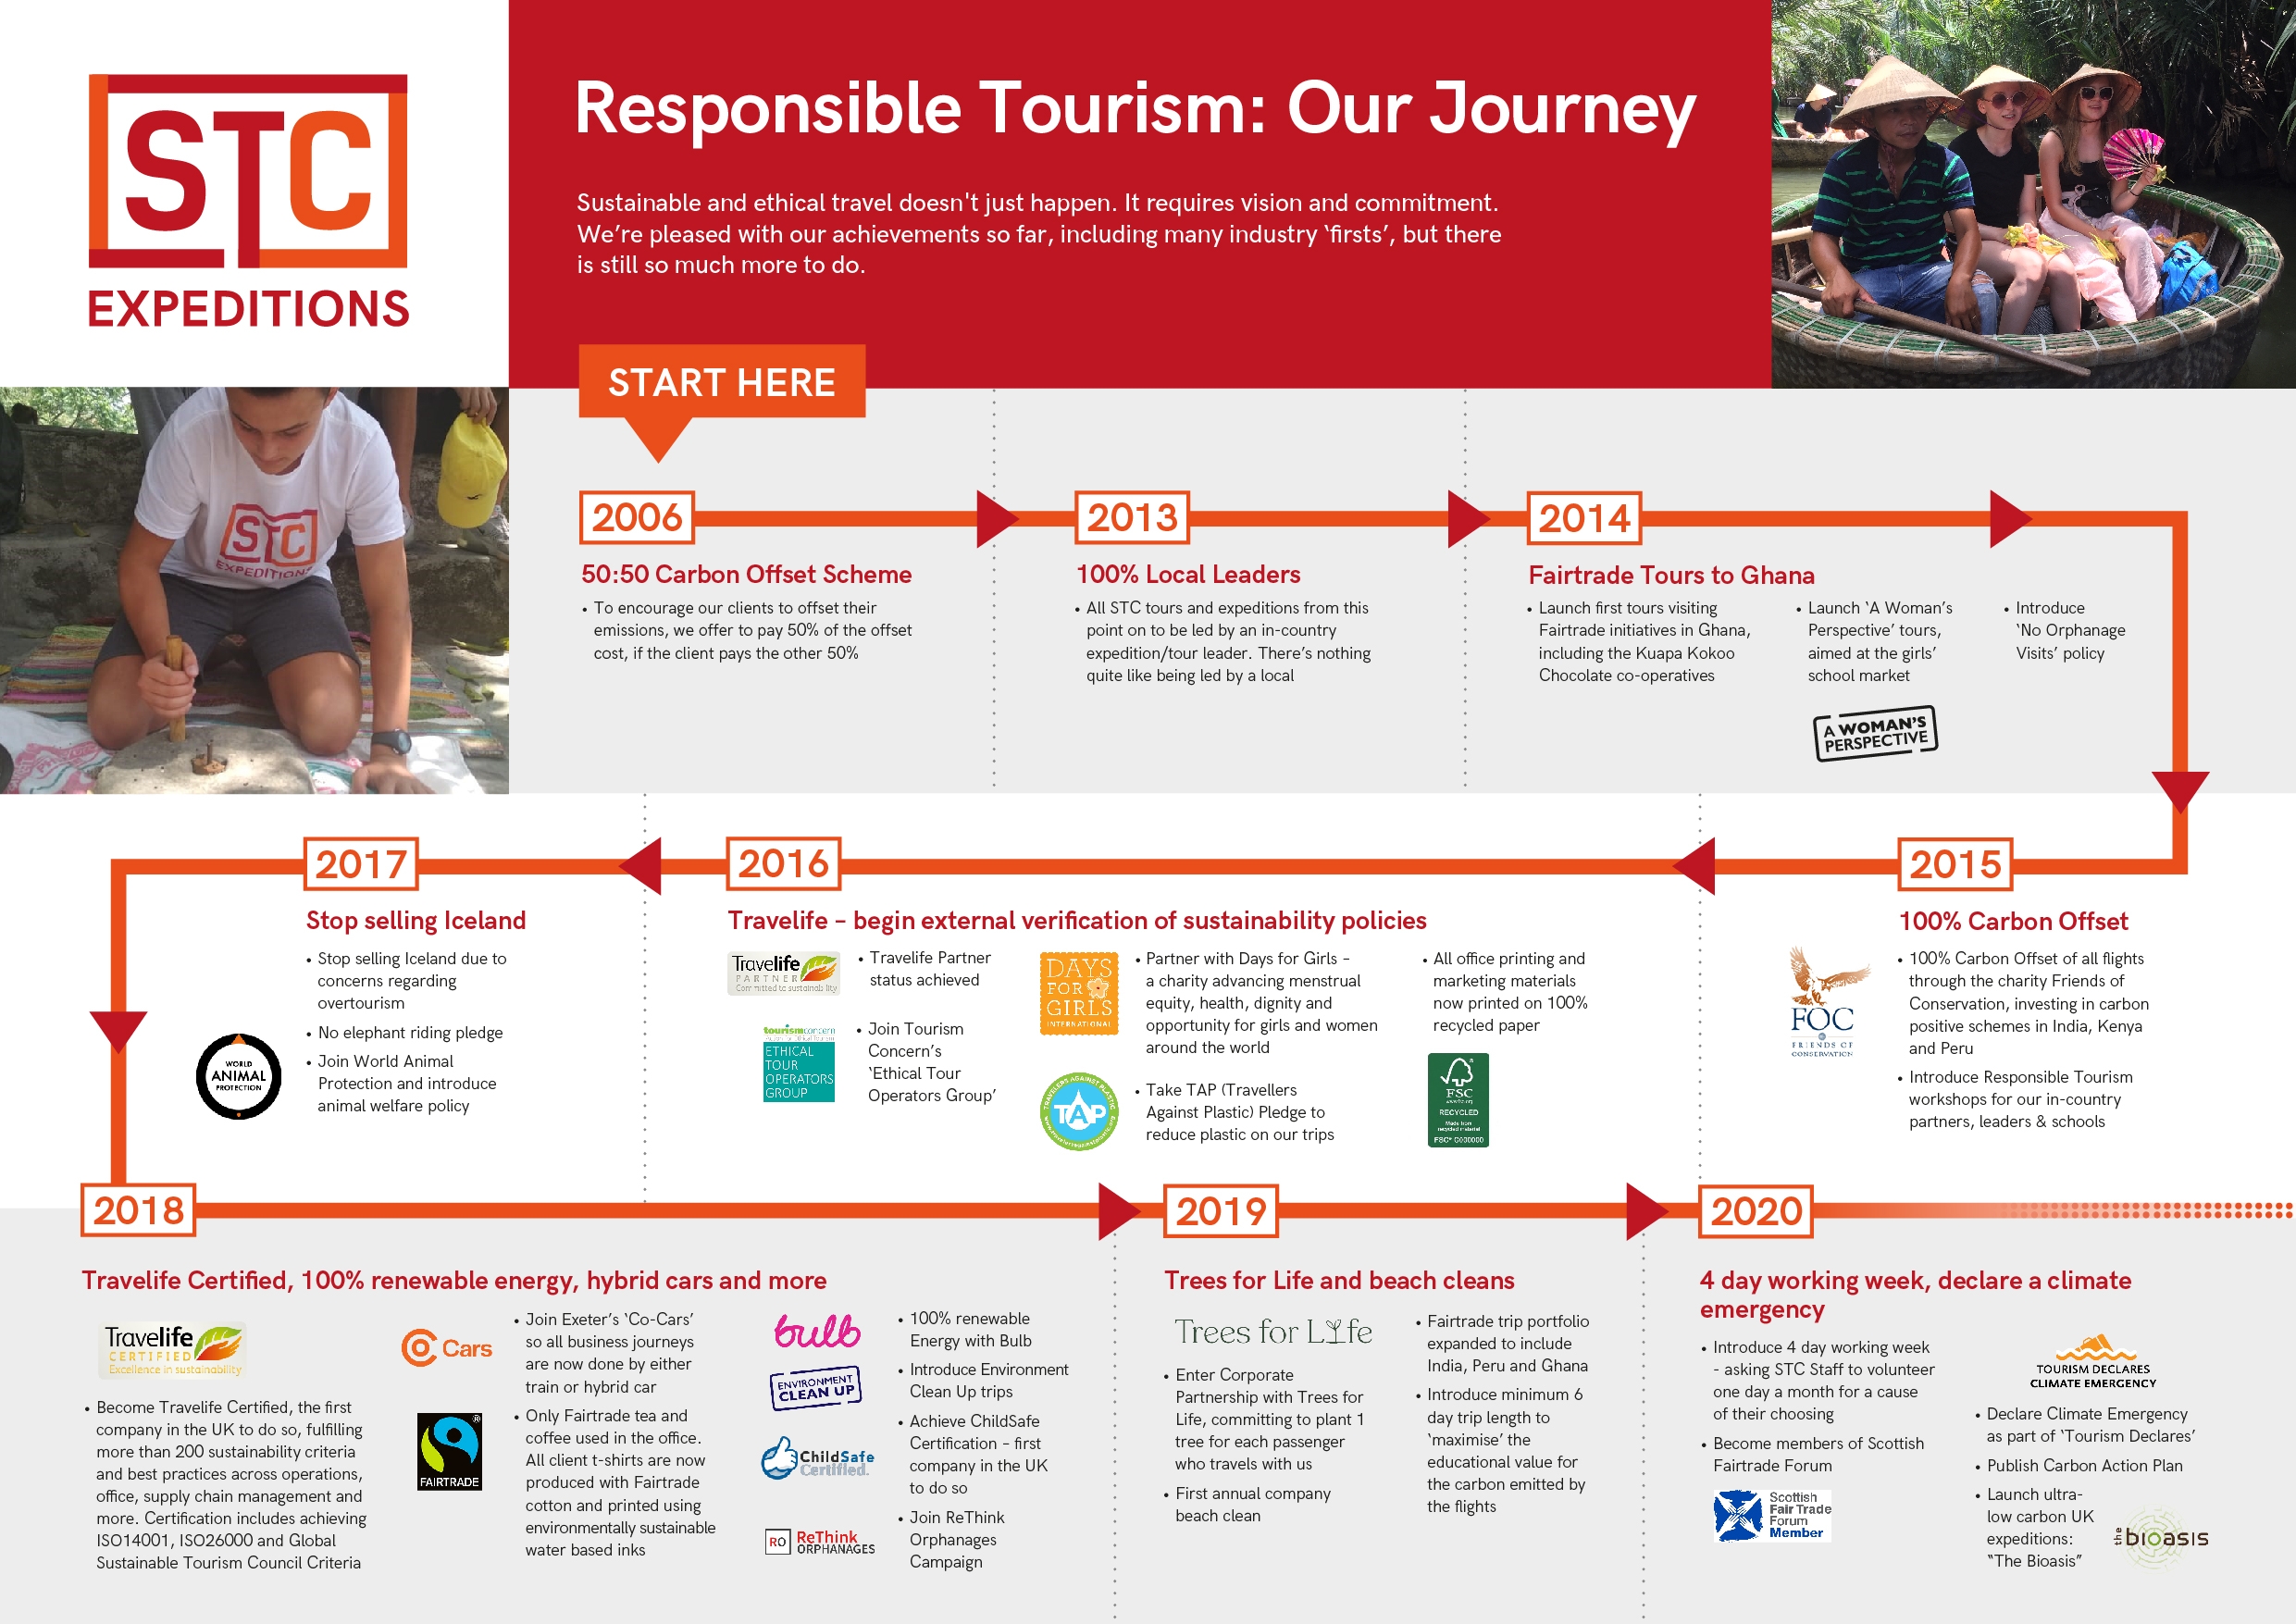 Our Journey in Responsible Tourism